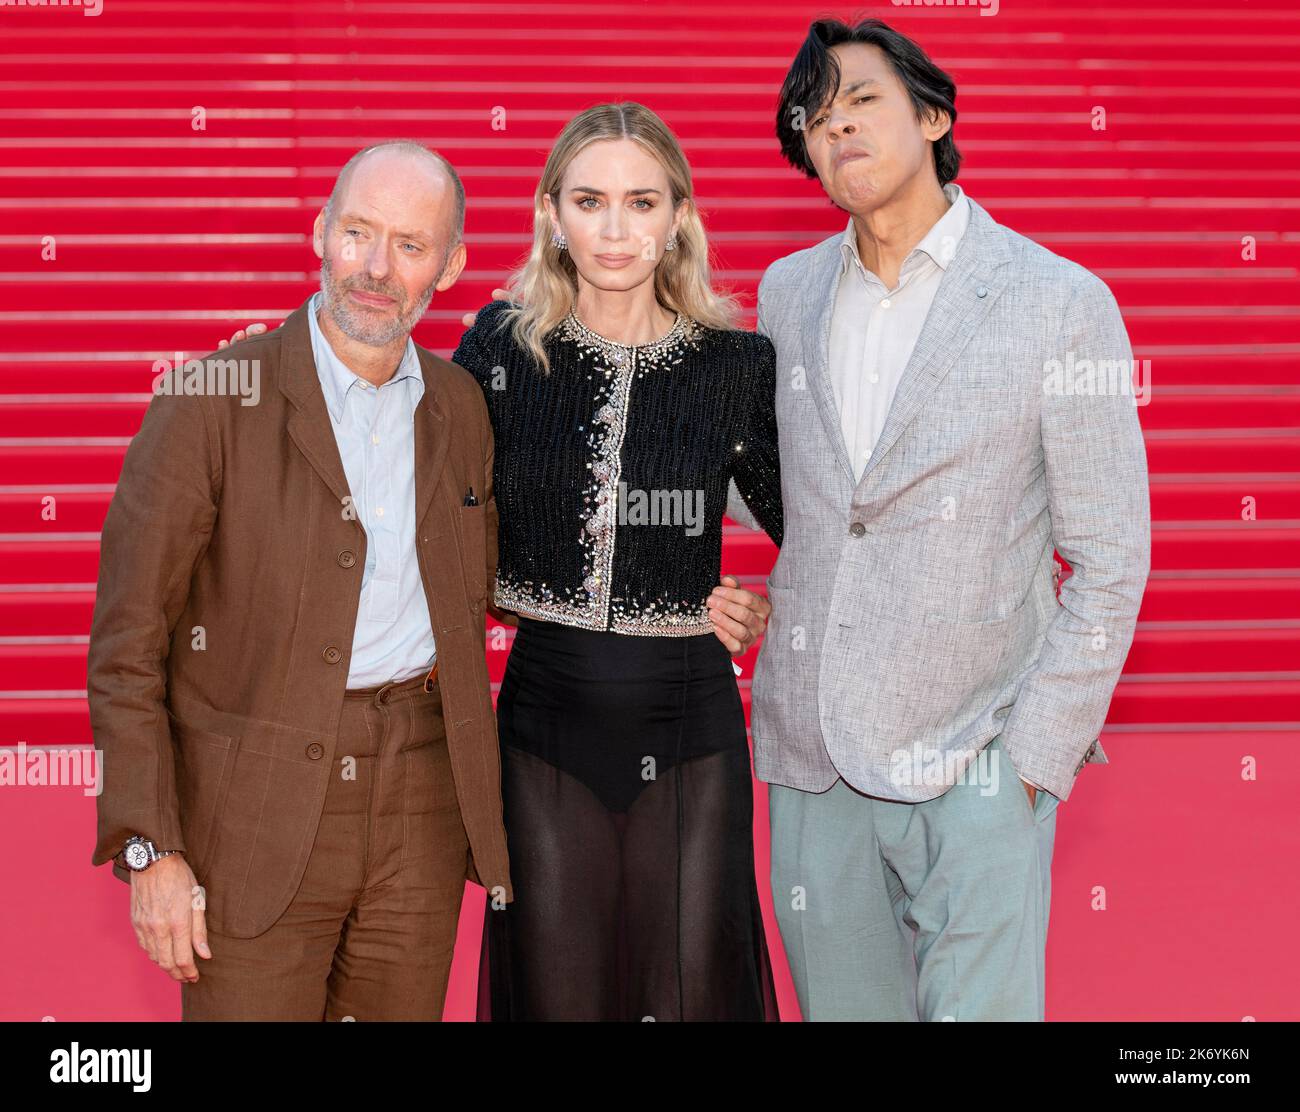 Cannes, France, 16 October 2022, Hugo Blick (Showrunner), Emily Blunt (Actress) and Chaske Spencer (Actor) on the red carpet for 'The English' during MIPCOM 2022 - The World's Entertainment Content Market © ifnm / Alamy Live News Stock Photo